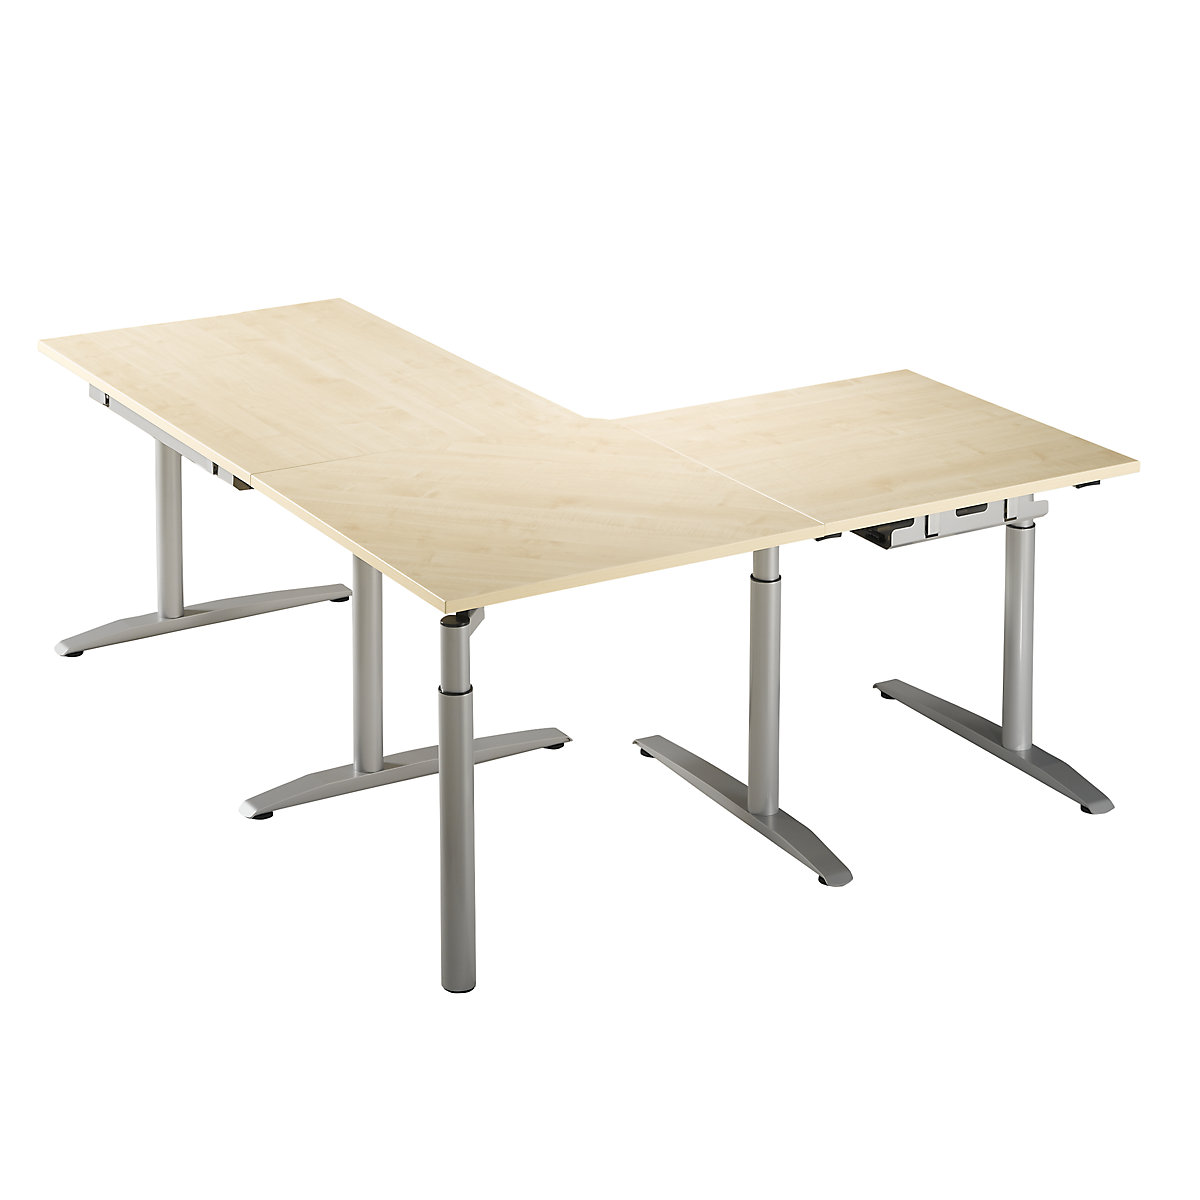 Linking top, height adjustable from 680 – 820 mm HANNA, 90°, with support leg, maple finish-5